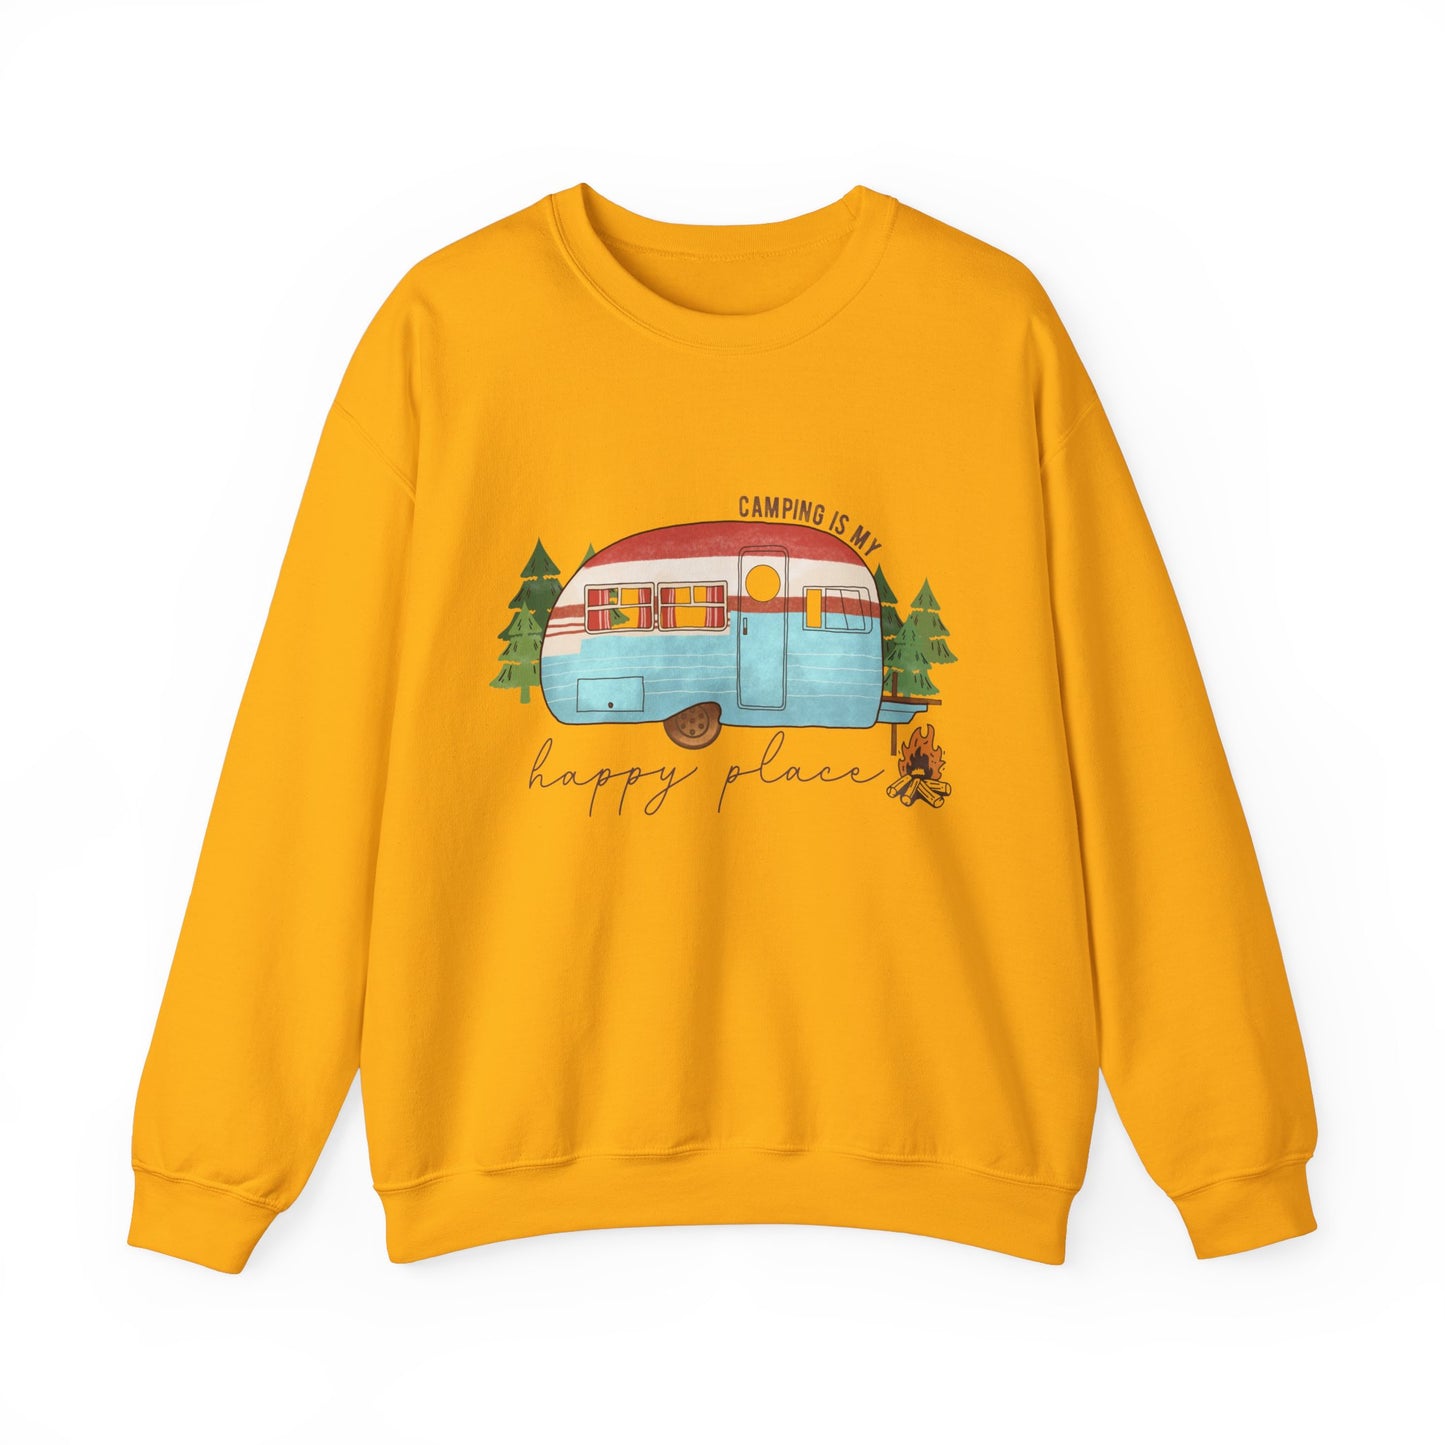 Camping is my happy place Adult Unisex Sweatshirt